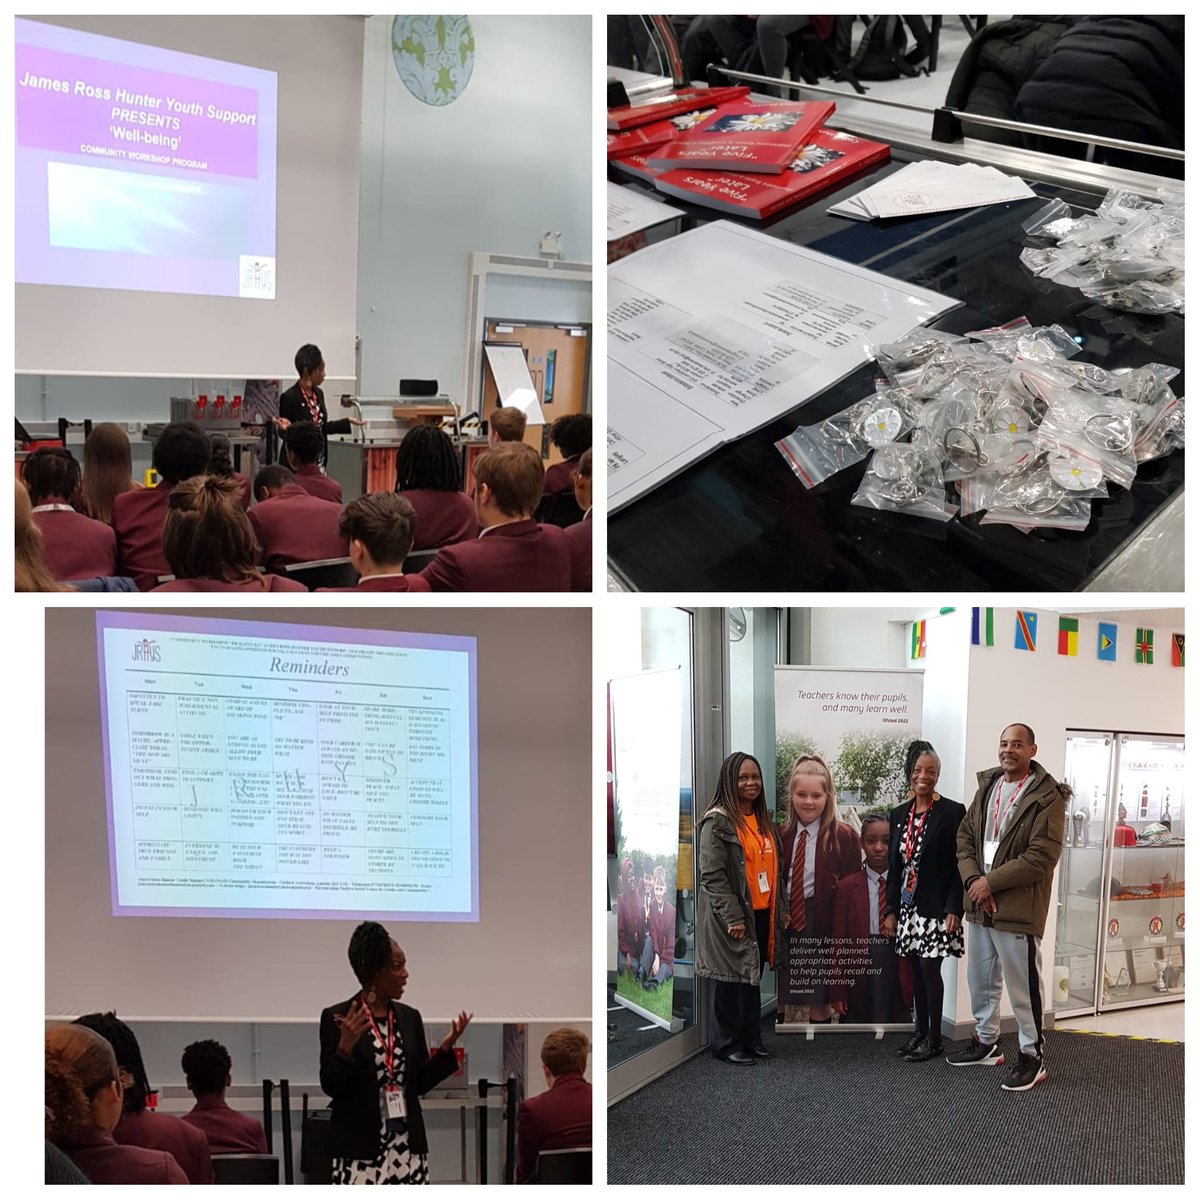 Finding and connecting with purpose ✨️ @Coinsborough College this morning on delivery on stress management. 'The schools are  assisting as best as they can, responsibilities also lies in our home.' cEb  #stressmanagement #youthwellbeing ✨️🌼✨️  #bhm  #wellbeing